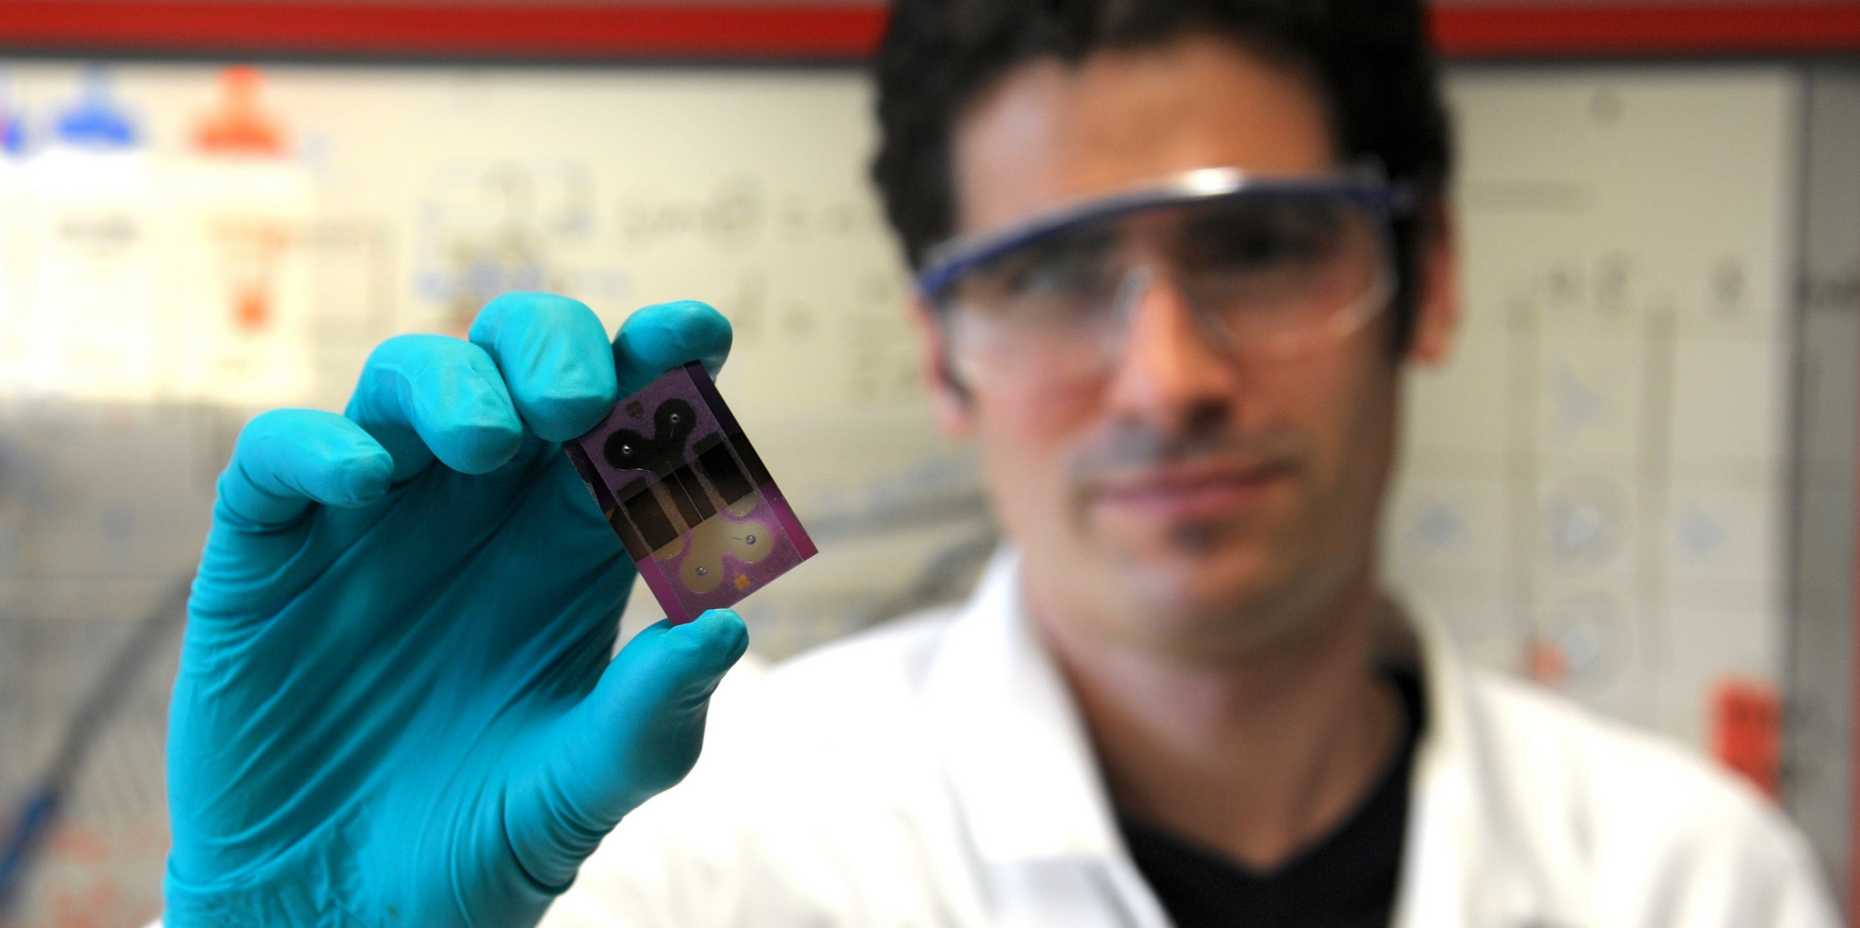 Enlarged view: Scientist presents a test chip